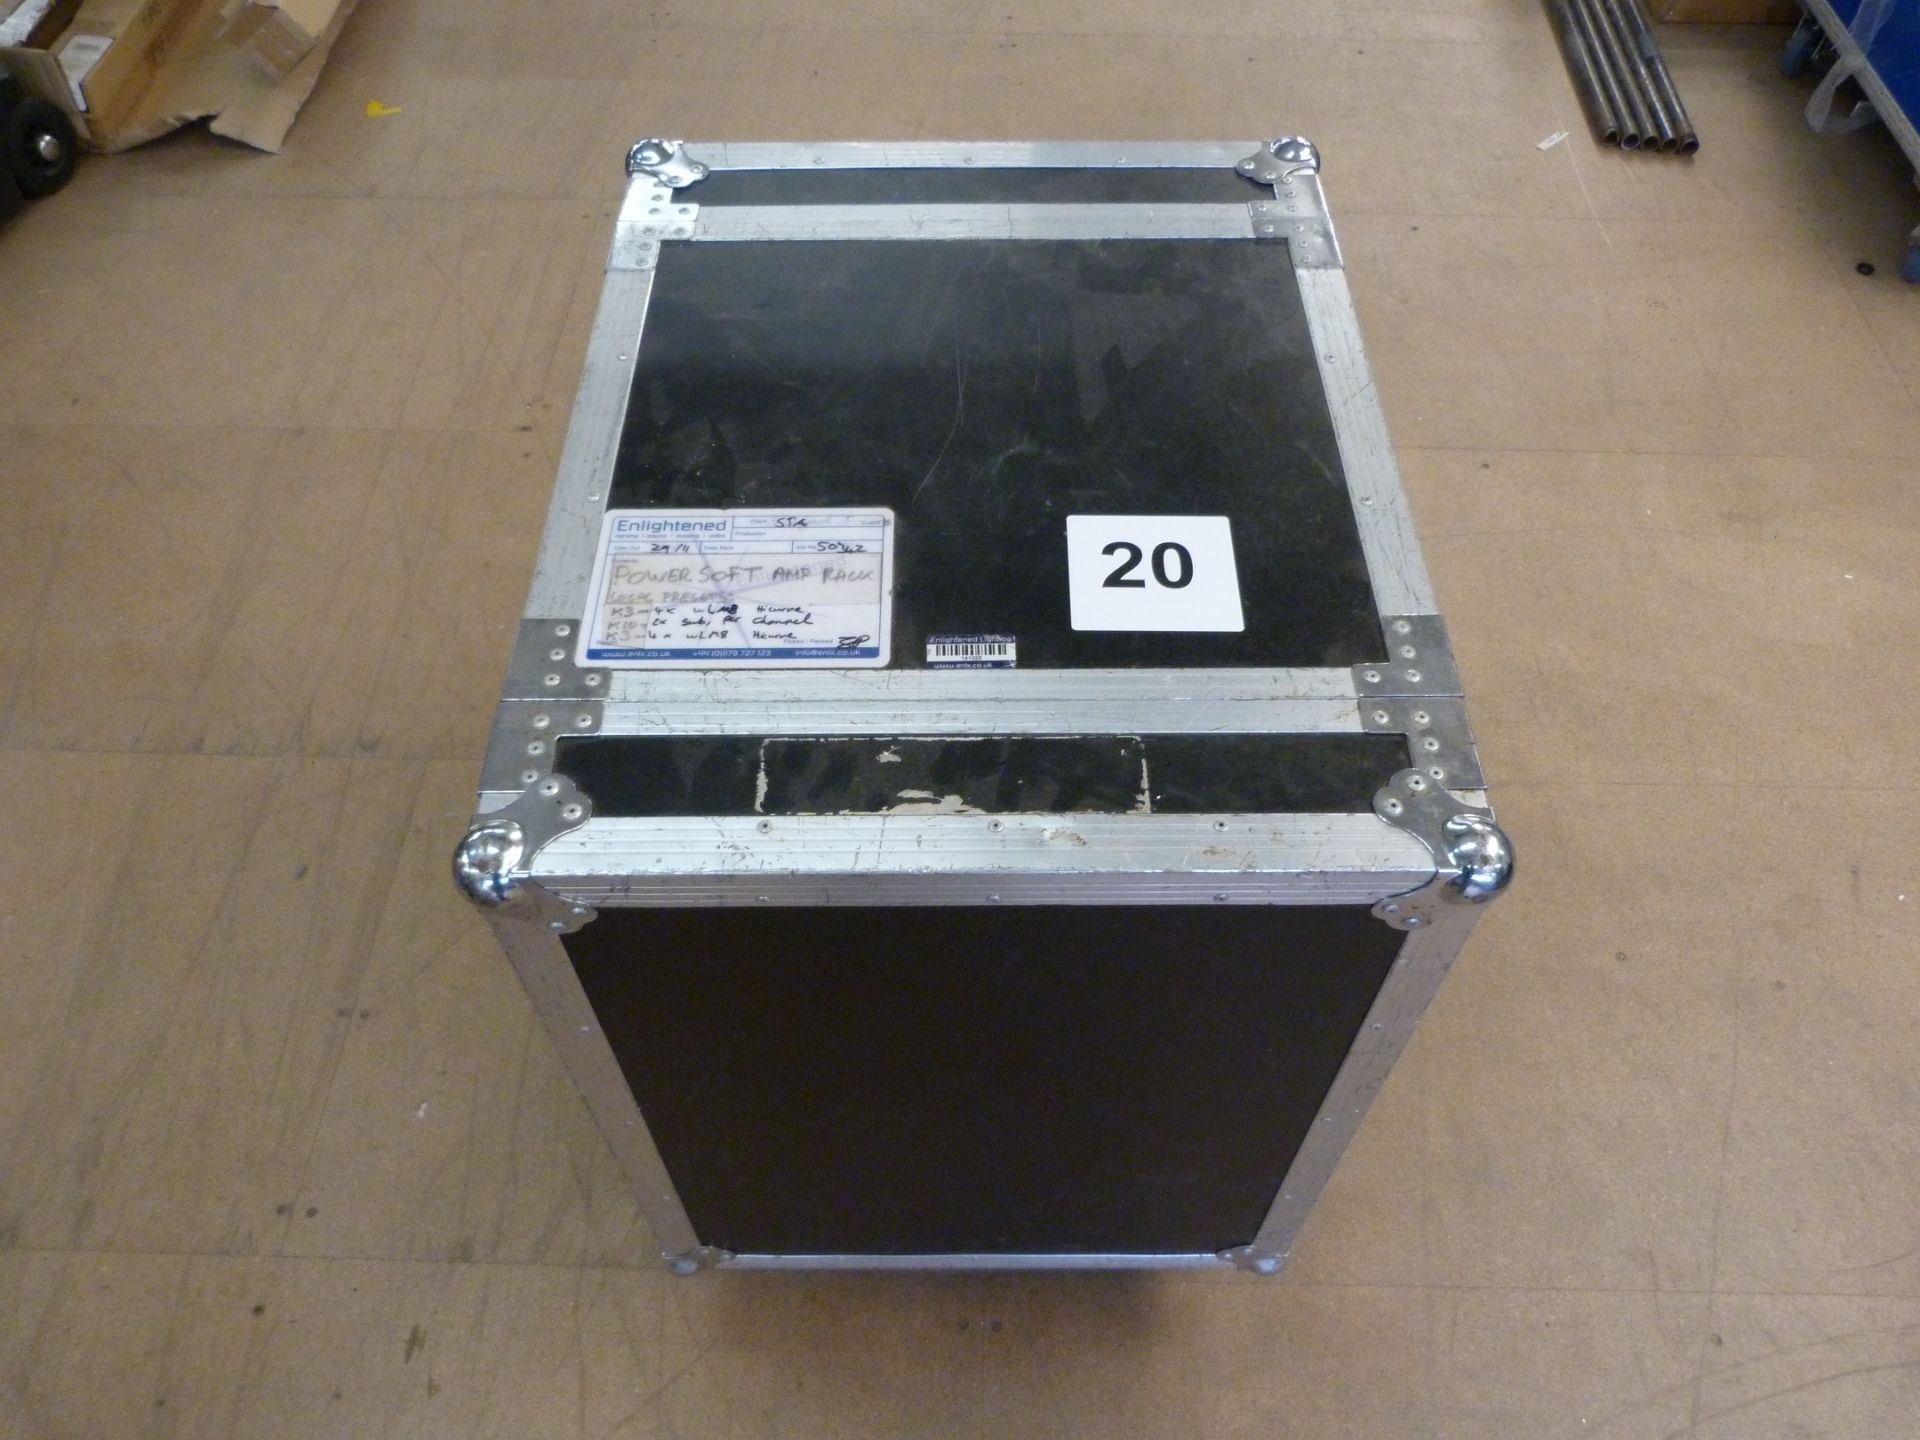 Powersoft Amp Rack. Included within Lot 10. If sum of Lots 11-20 is more than Lot 10, will be sold - Image 17 of 17